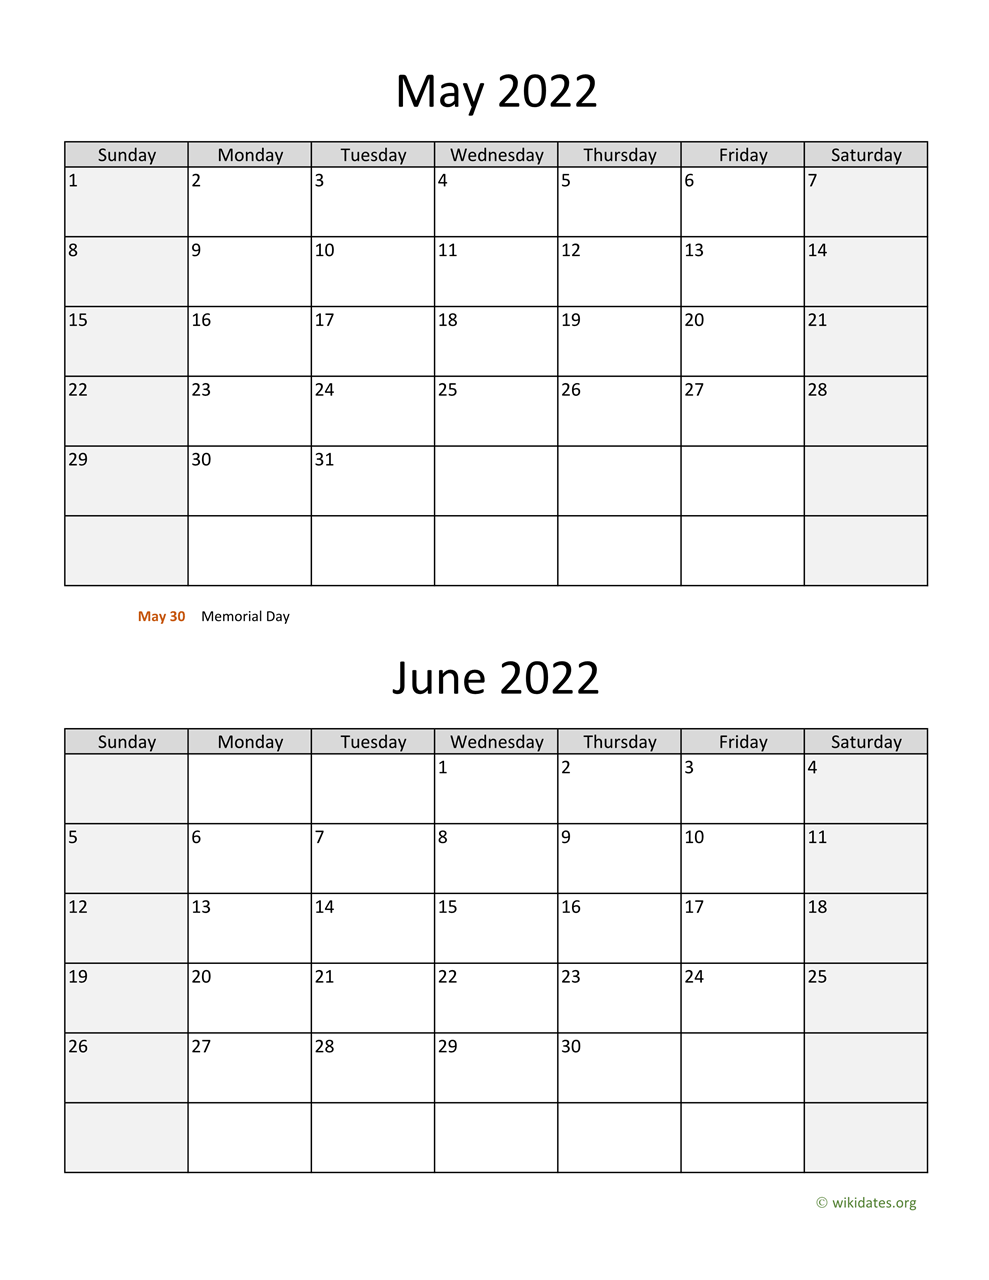 May June July August Calendar 2022 May And June 2022 Calendar | Wikidates.org